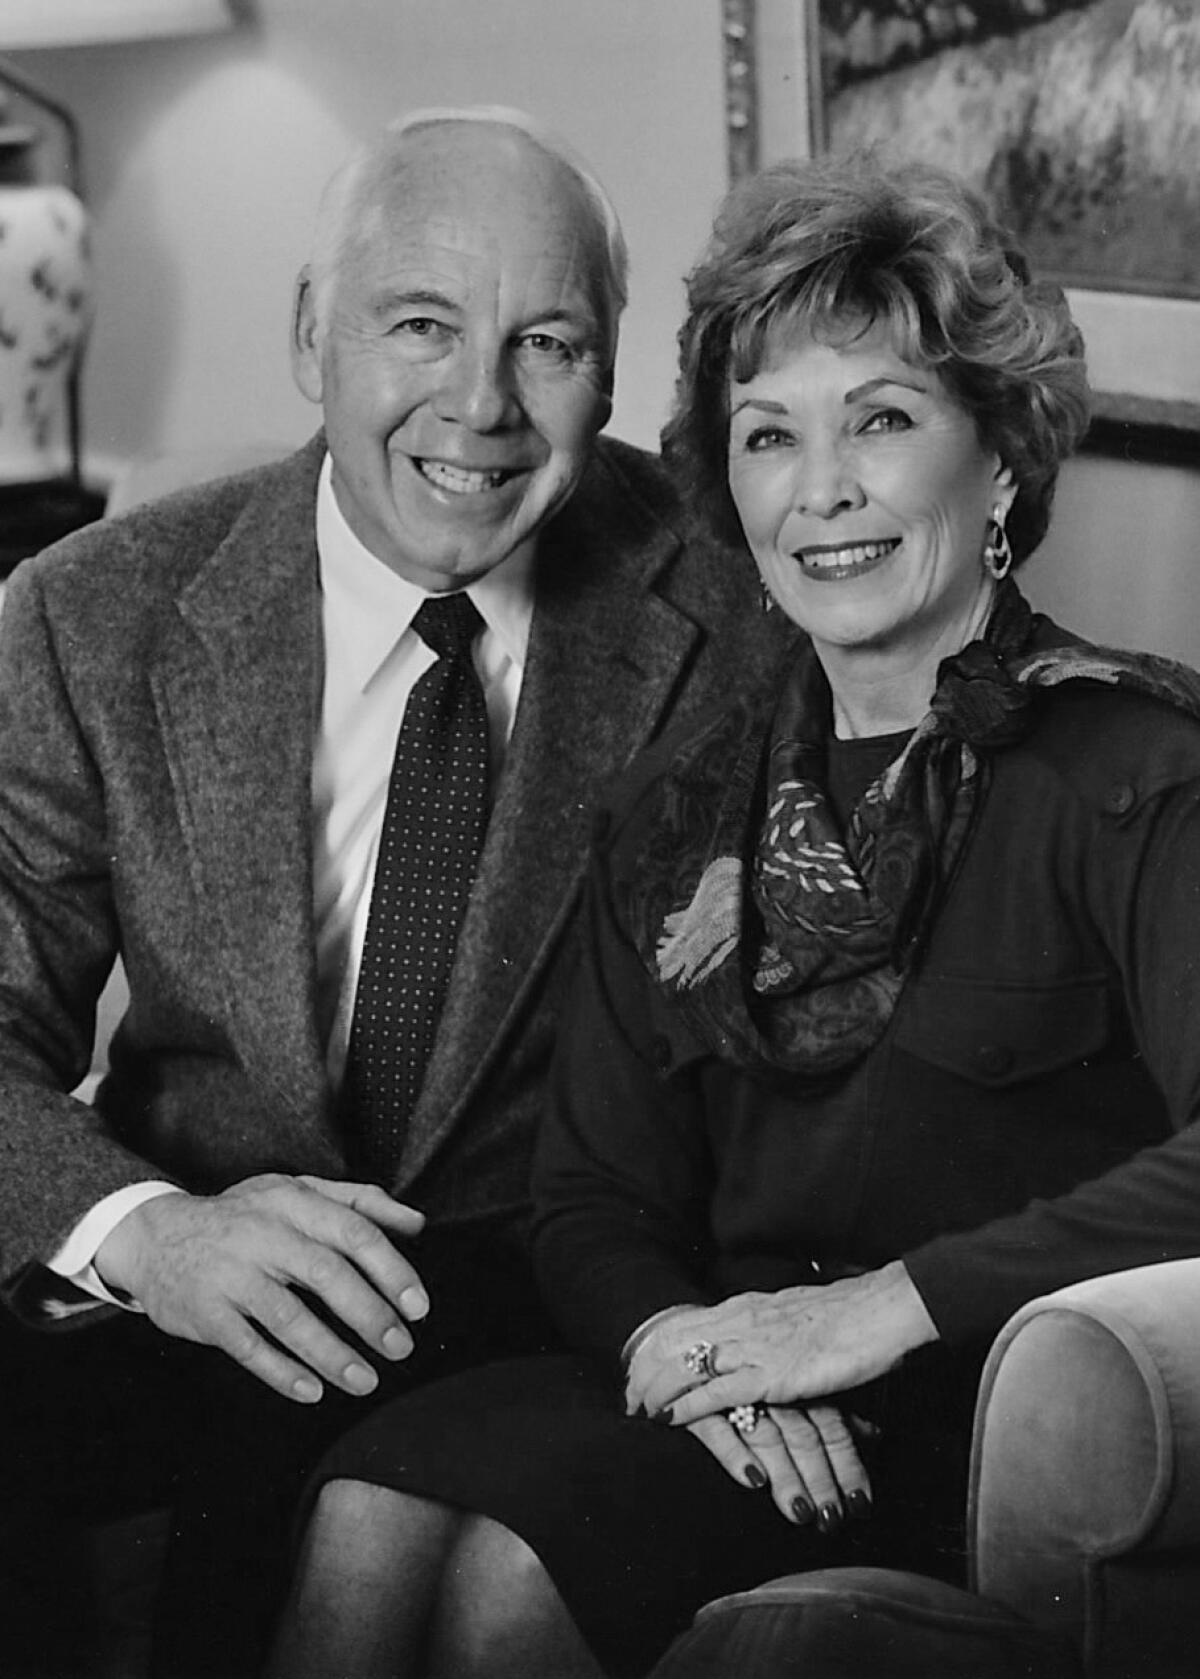 Bob and Marion Wilson of Rancho Santa Fe in 1991. Bob died in January and Marion died in 2020.